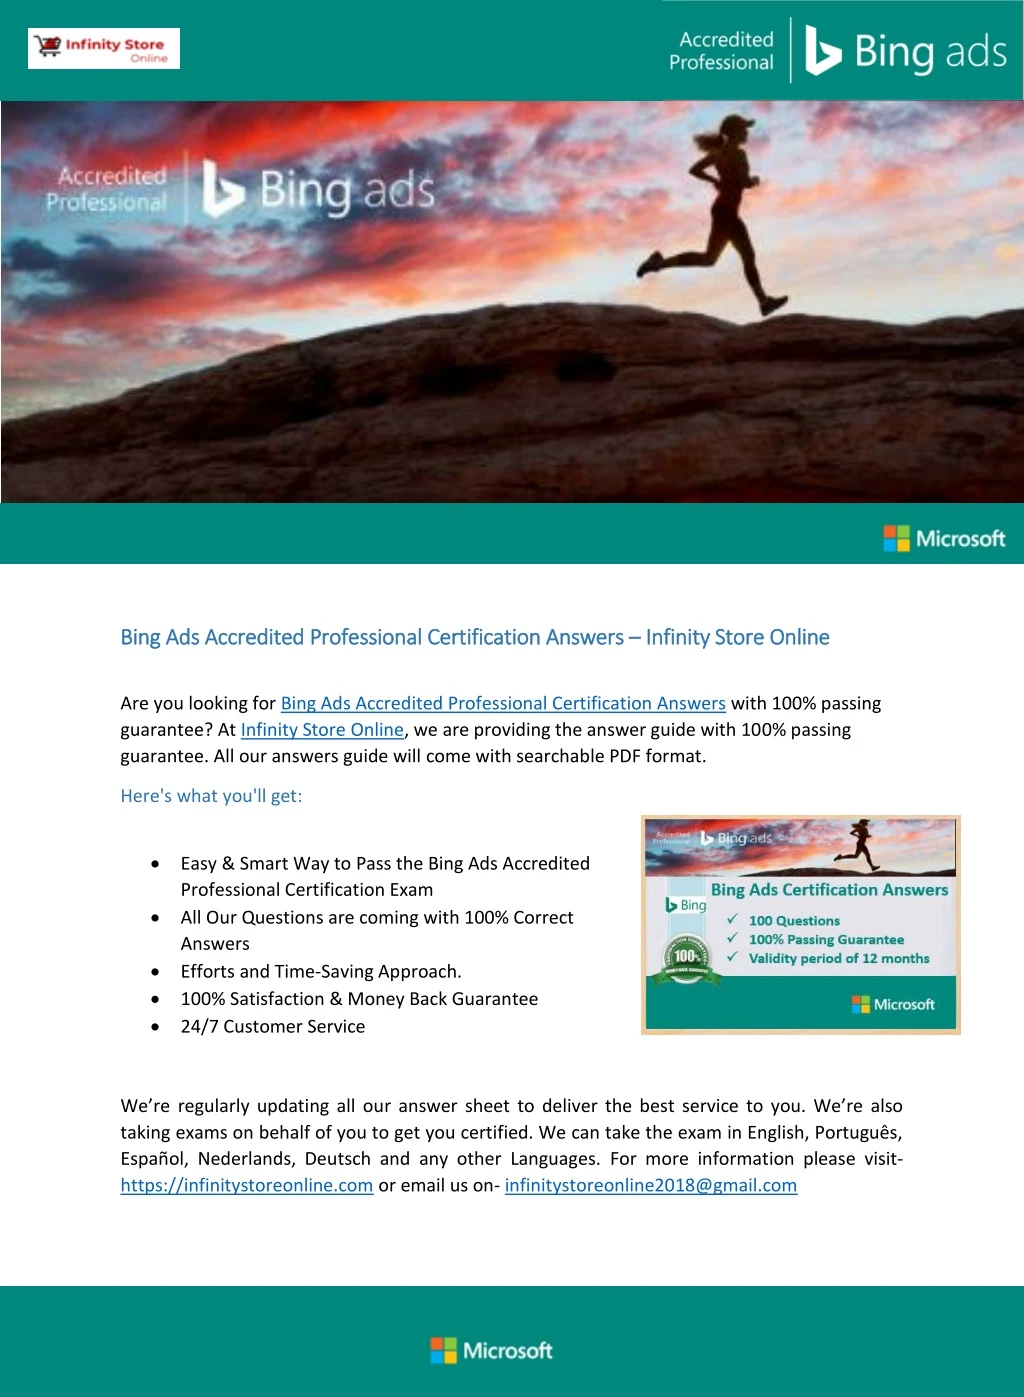 bing ads accredited professional certification